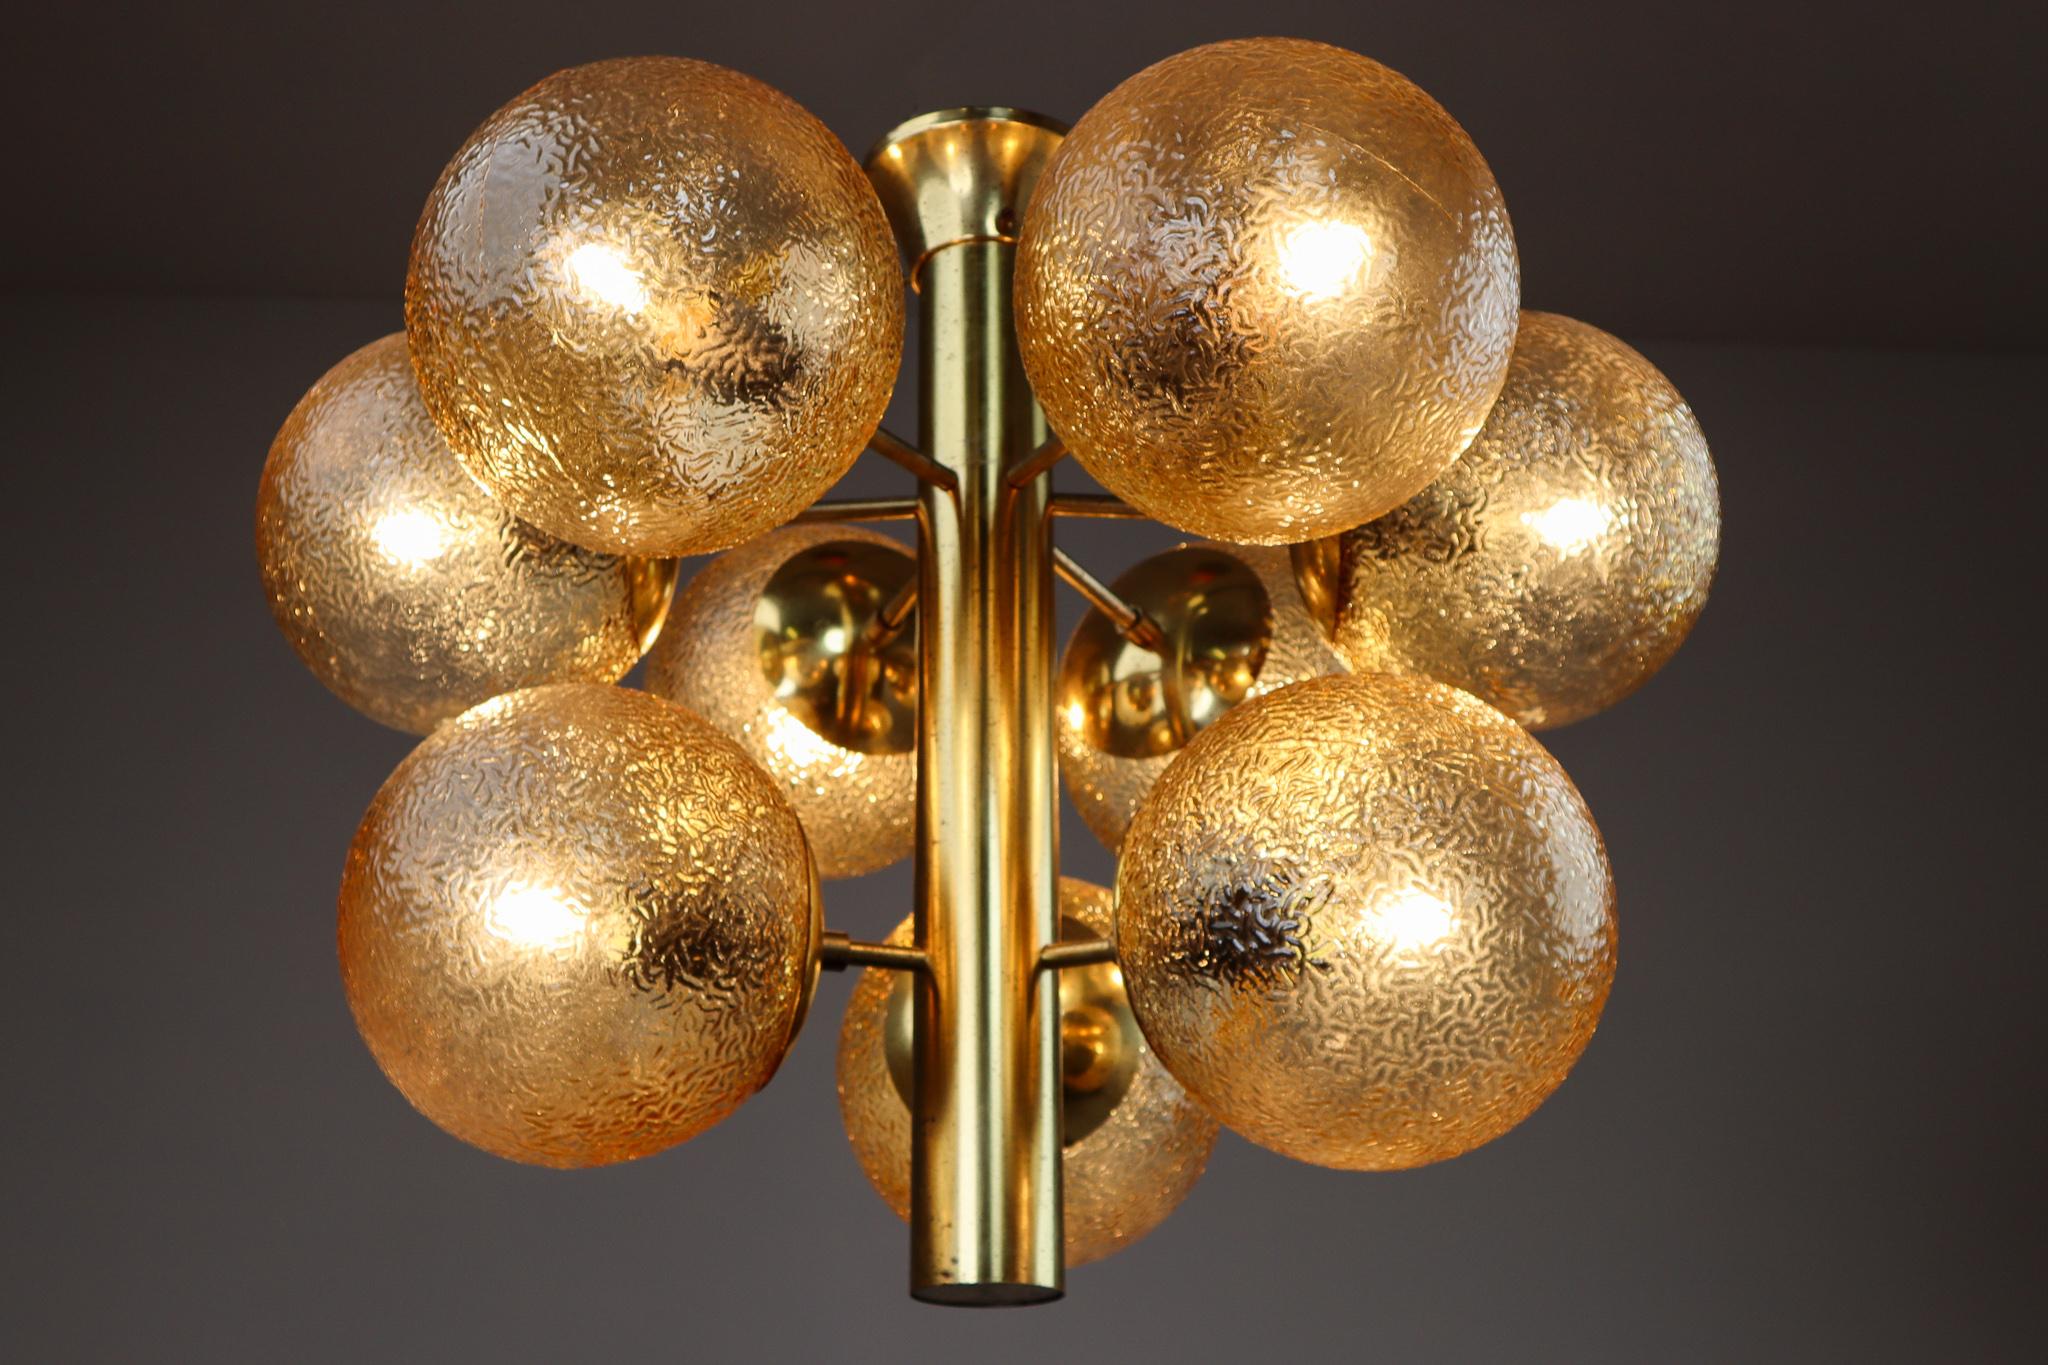 Stunning Sputnik chandelier with 9 handmade glass globes and patinated brass by Kaiser Leuchten, Germany, 1960s.This chandelier will contribute to a luxurious character of the (hotel-bar) interior. Very good vintage condition without damages. 100%